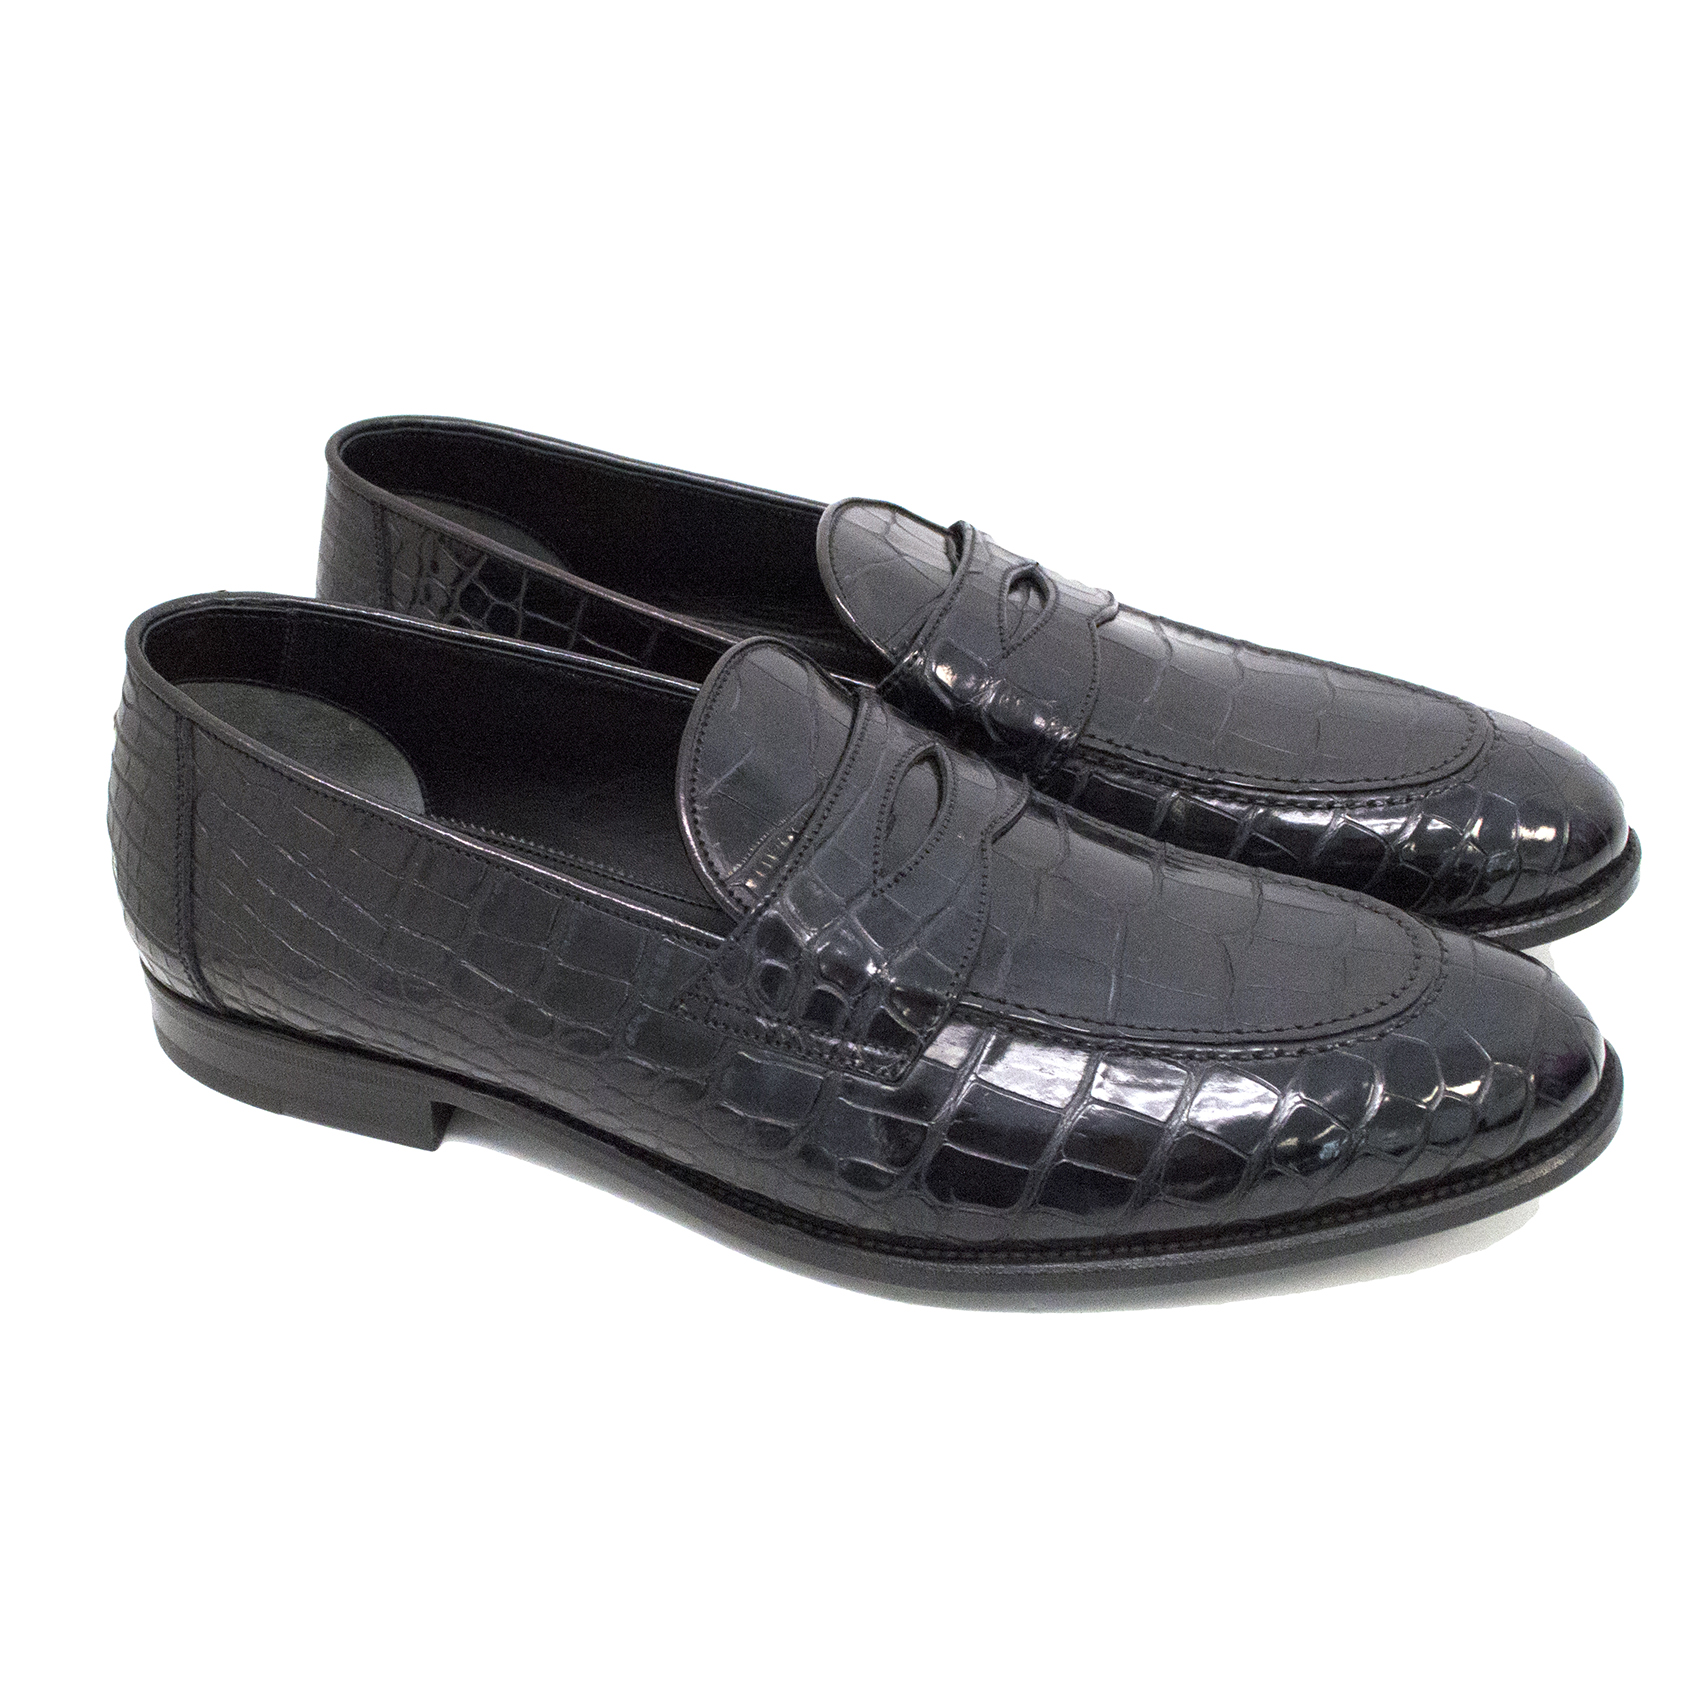 tom ford crocodile shoes price